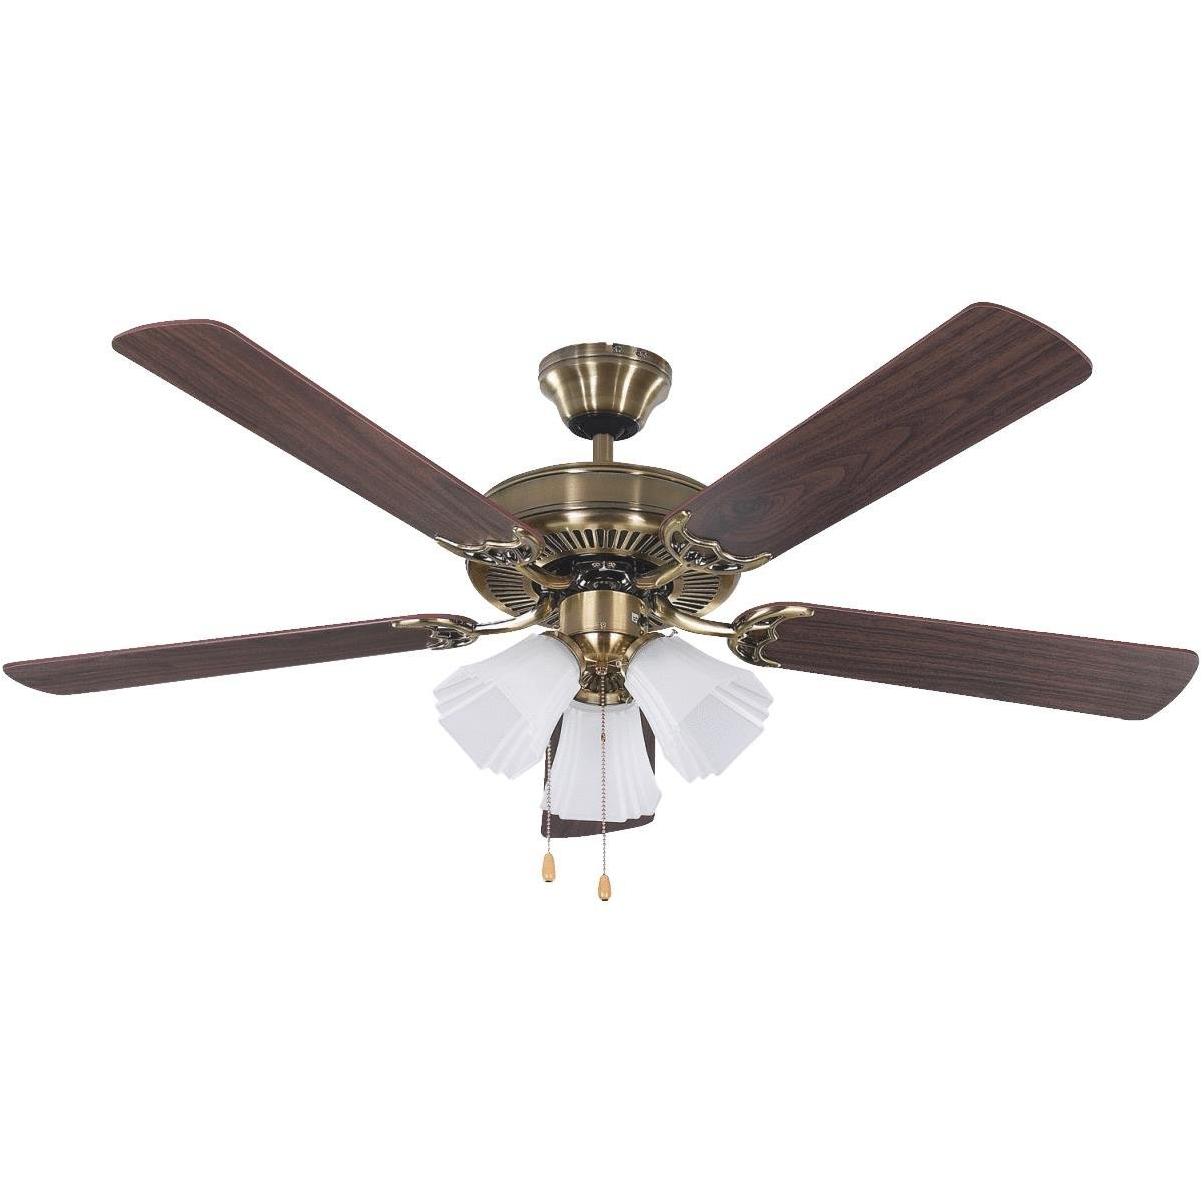 Home Impressions Sherwood 52 In Antique Brass Ceiling Fan With Light Kit Hills Flat Lumber